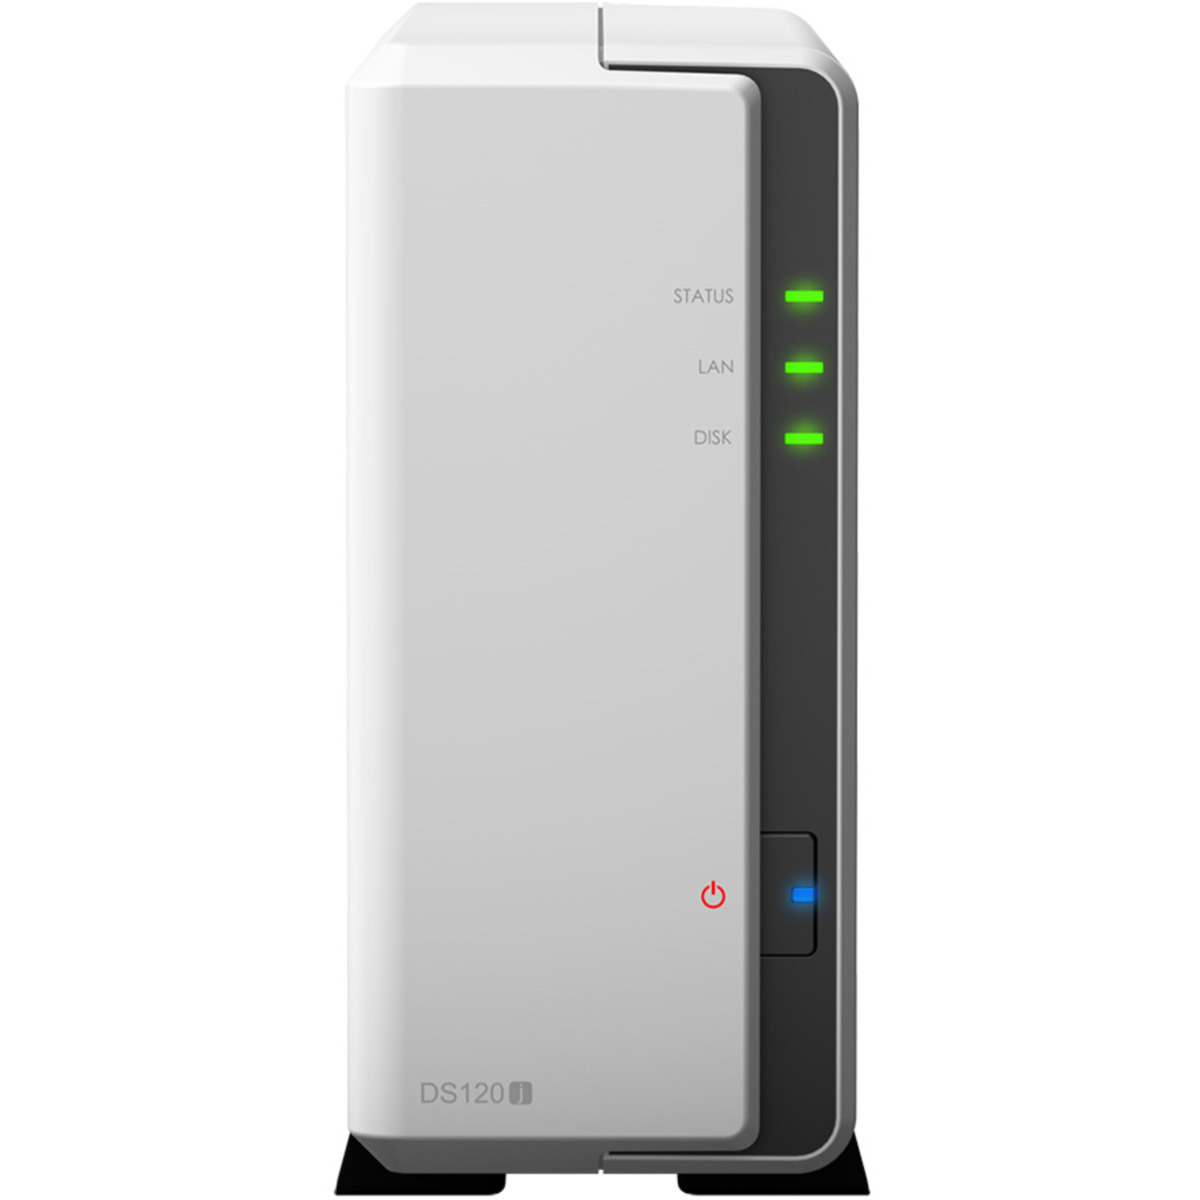 buy $378 Synology DiskStation DS120j 8tb Desktop NAS - Network Attached Storage Device 1x8000gb Western Digital Ultrastar DC HC320 HUS728T8TALE6L4 3.5 7200rpm SATA 6Gb/s HDD ENTERPRISE Class Drives Installed - Burn-In Tested - nas headquarters buy network attached storage server device das new raid-5 free shipping usa christmas new year holiday sale DiskStation DS120j